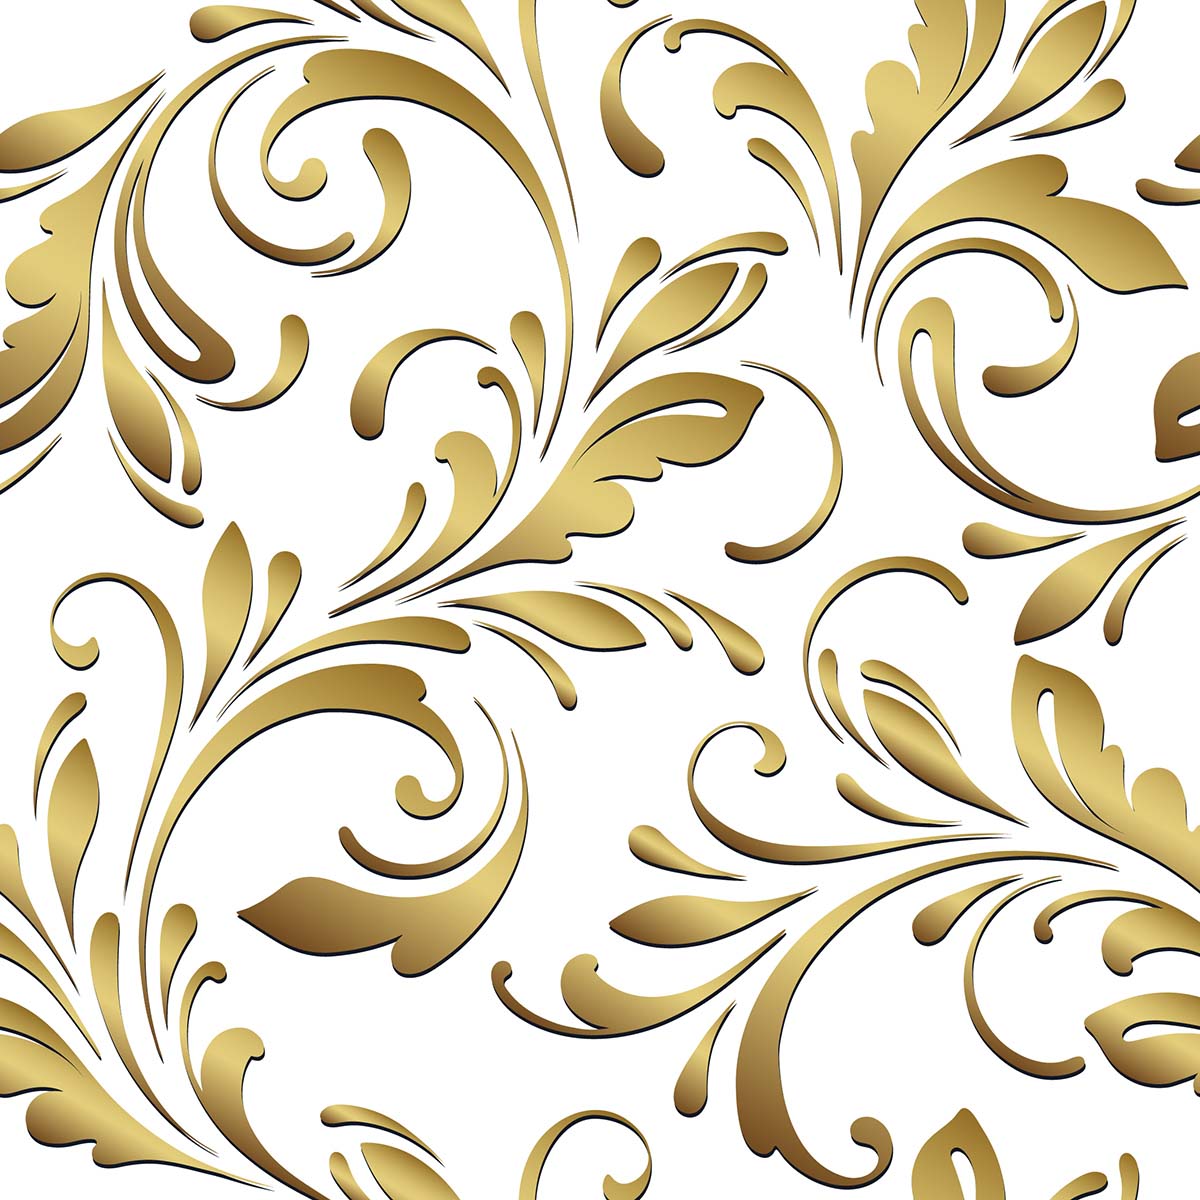 A gold and white floral pattern